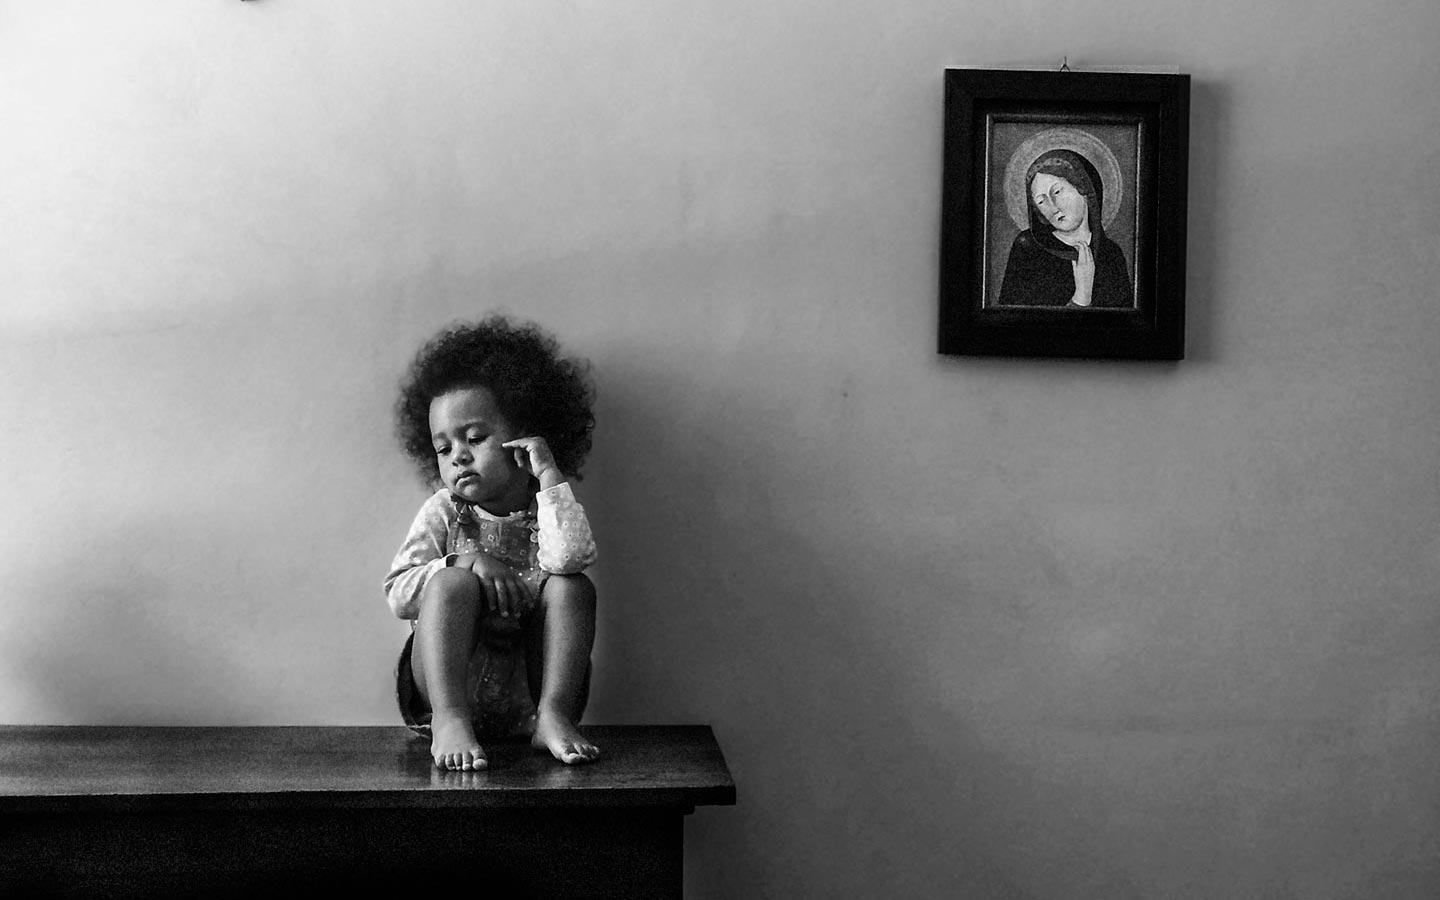 Emily Schiffer Wins Our ‘Family’ Call with an Intimate Portrayal of Her Own Family Life | FotoRoom